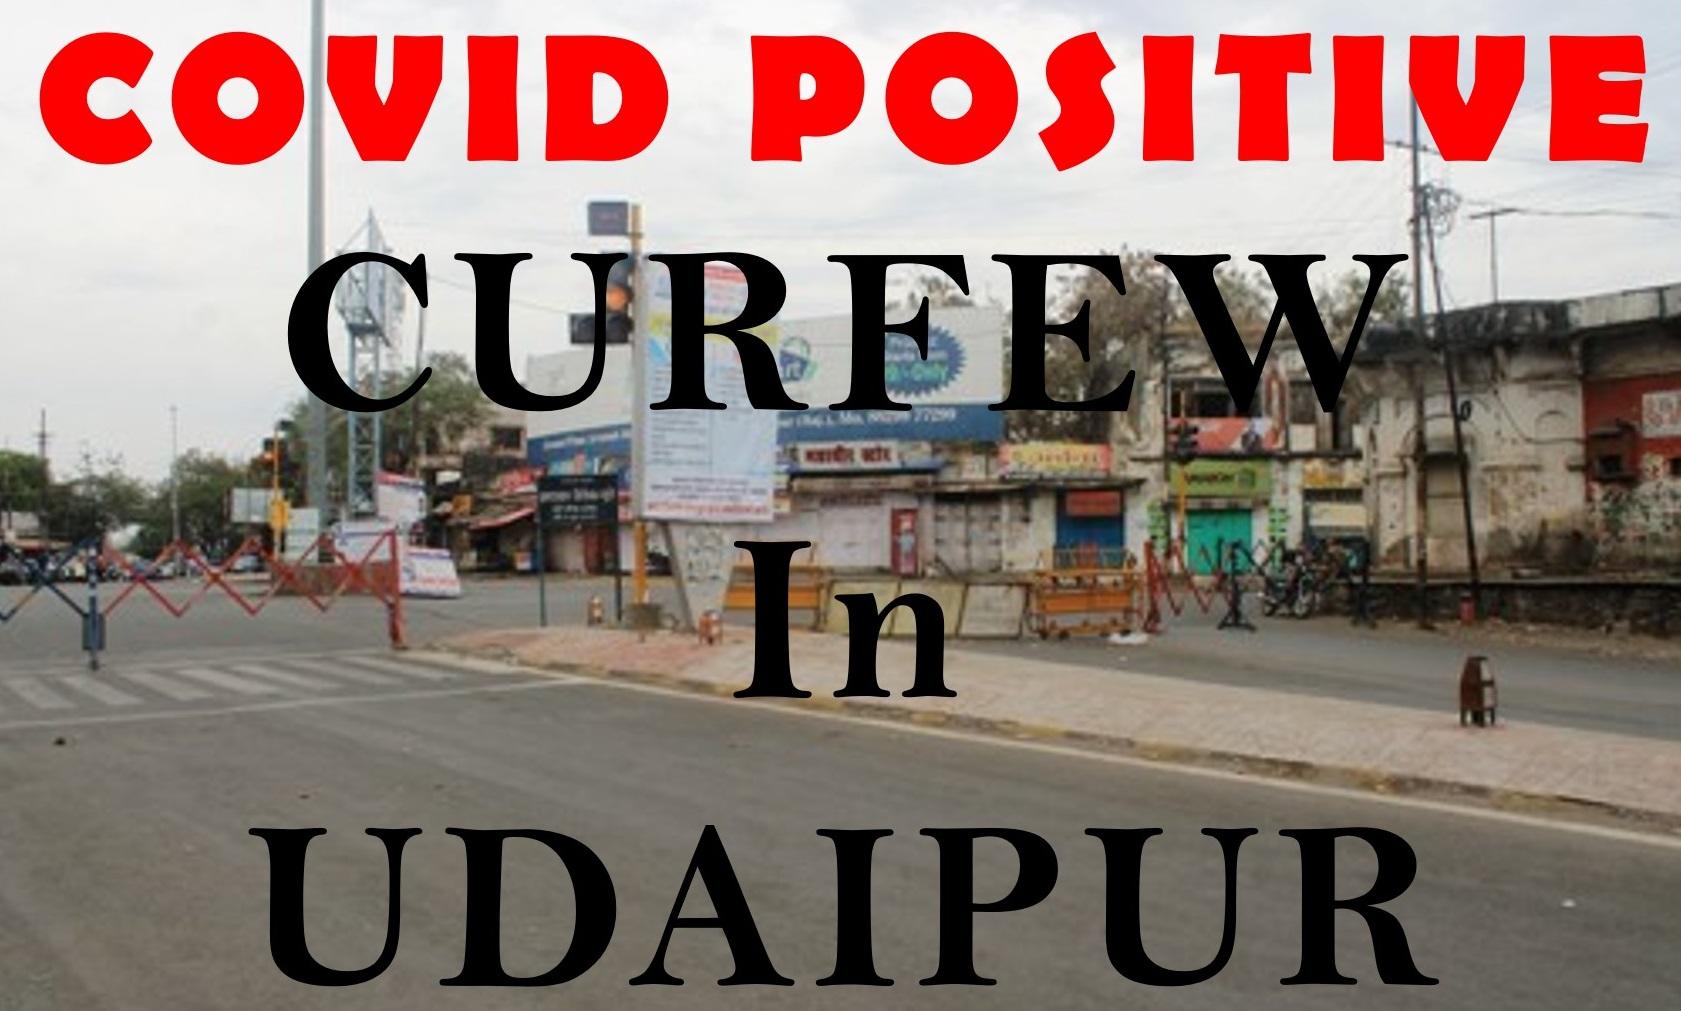 UPDATED NEWS: Police Roundup Masjid Maulana and 8 others in violation of curfew orders - Sent to Isolation